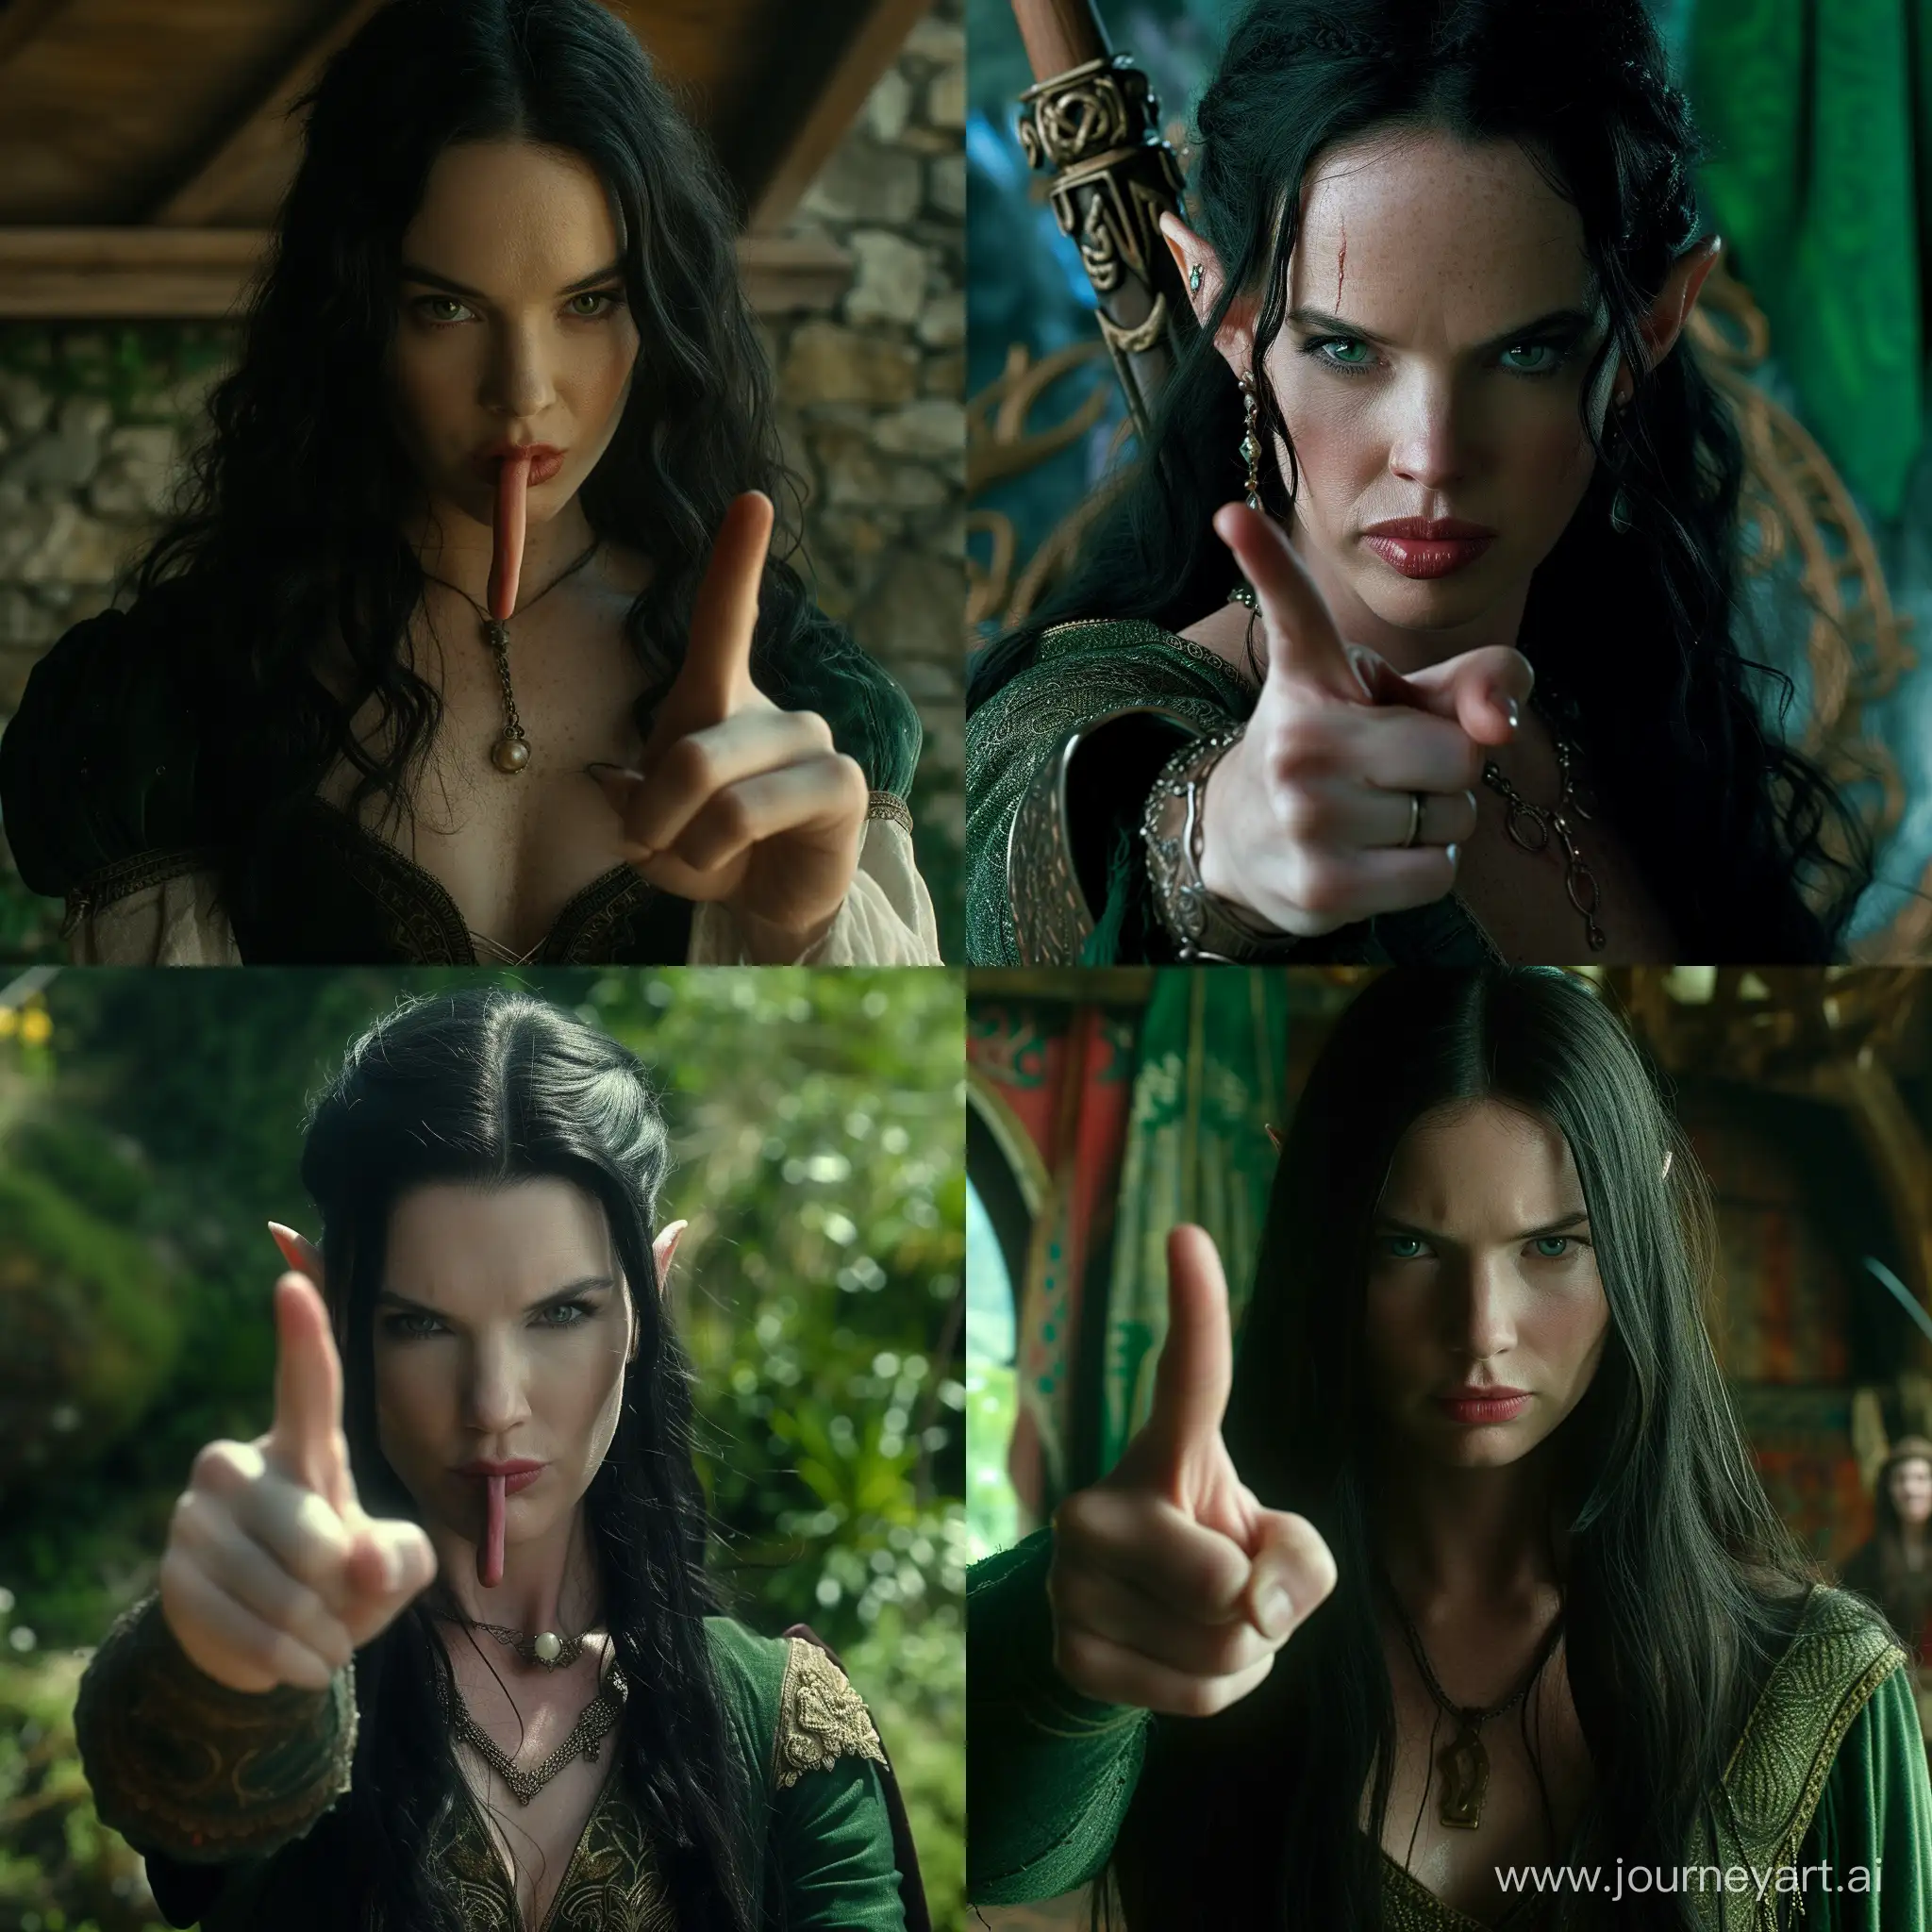 movie scene cinematic krysten Ritter black hair green eyes as an elf Jessica jones showing middle finger to king max brown Edward Seymour angry fantasy